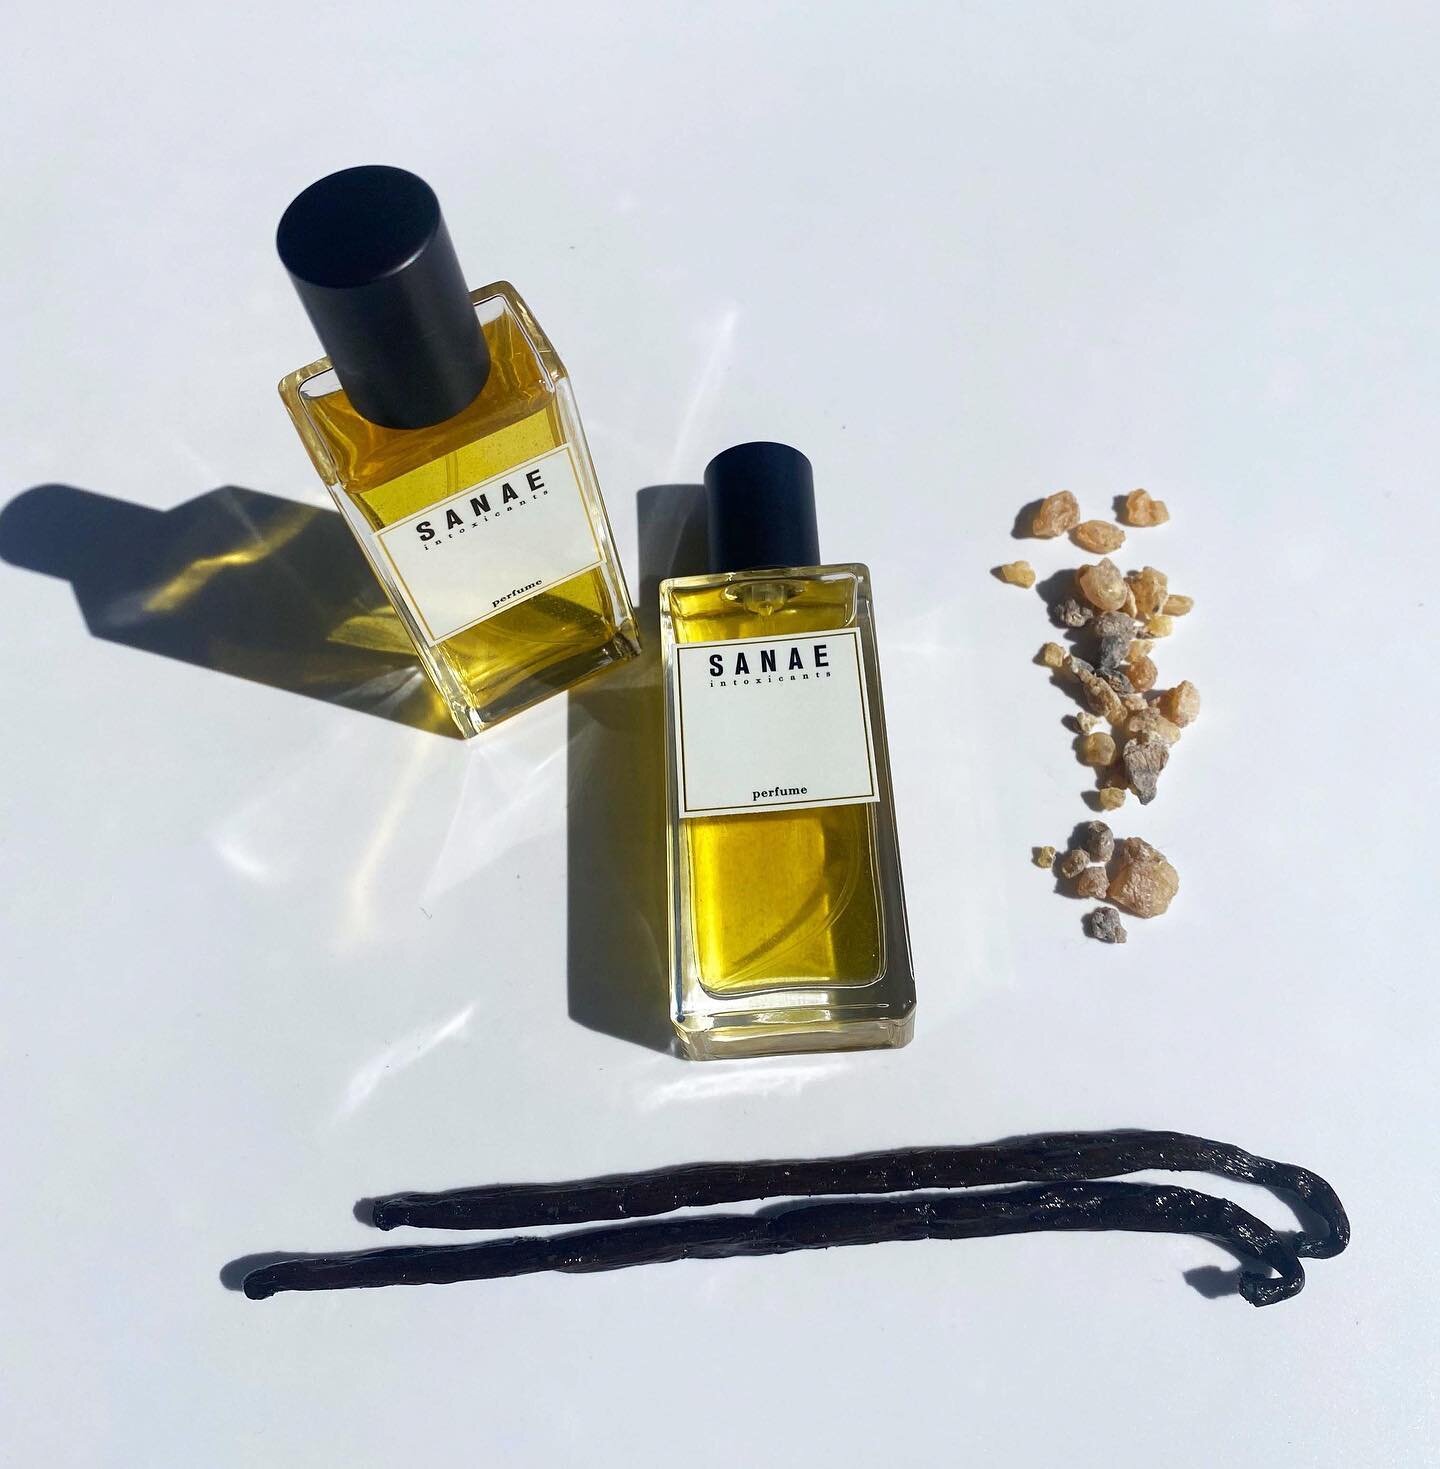 Immerse yourself in the magic that is Babe. The harmonious notes of fig, wild oranges 🍊, sandalwood, &amp; Madagascar vanilla are delicately intertwined to create the perfect balance. 

Comment &ldquo;BABE&rdquo; and we&rsquo;ll send you a link to p